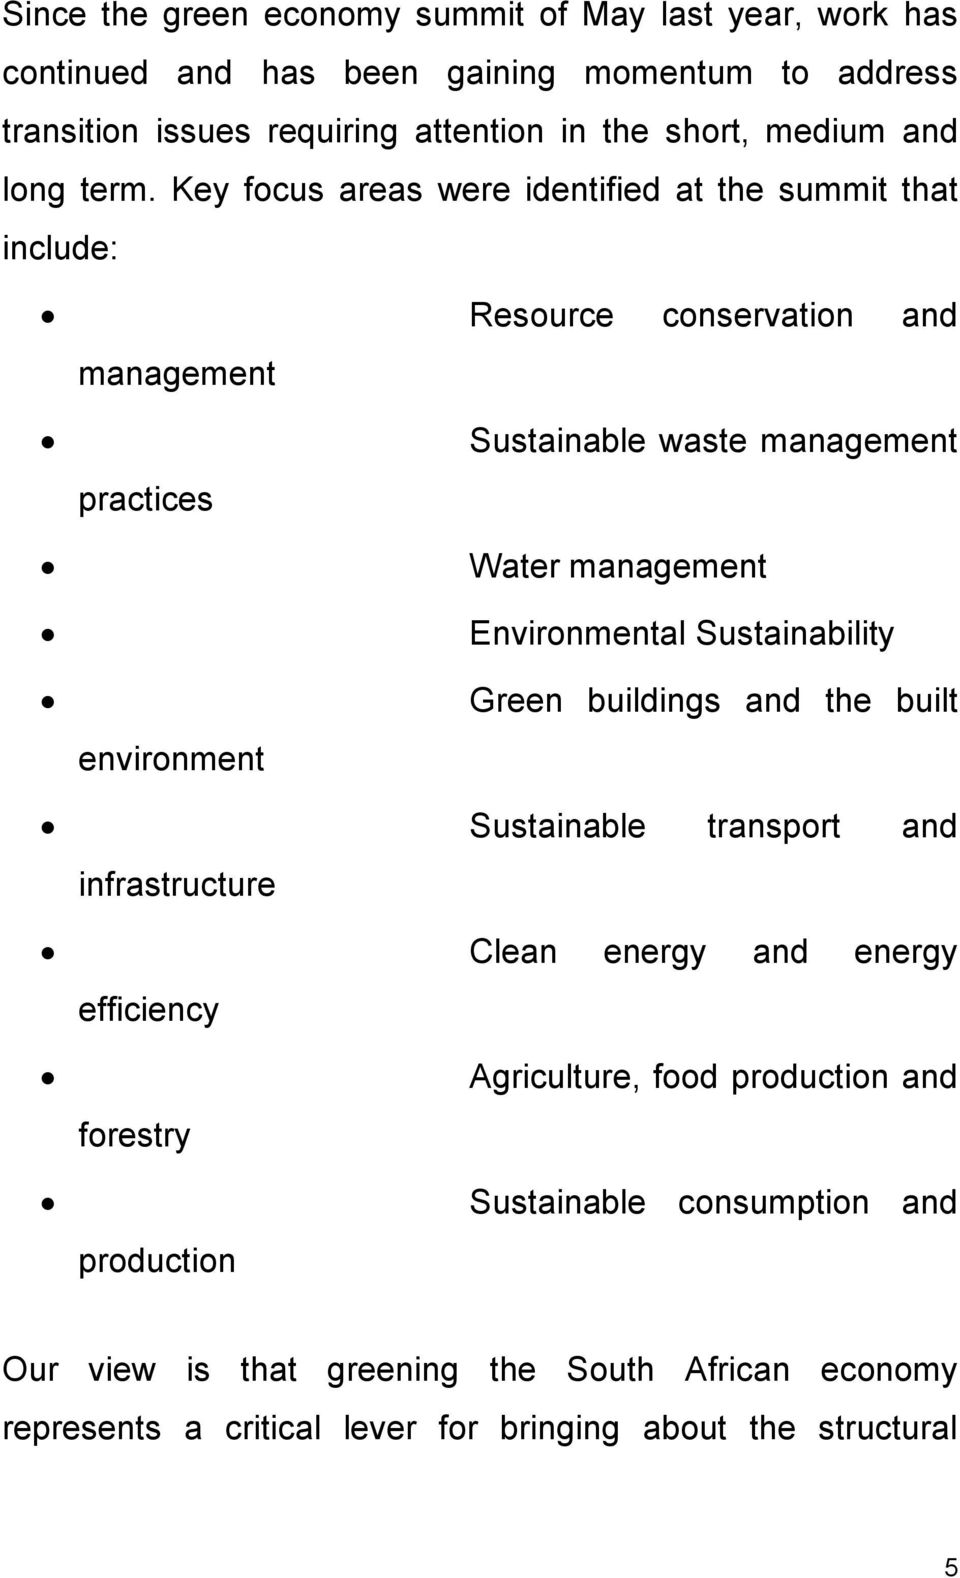 Key focus areas were identified at the summit that include: Resource conservation and management practices environment Sustainable waste management Water management